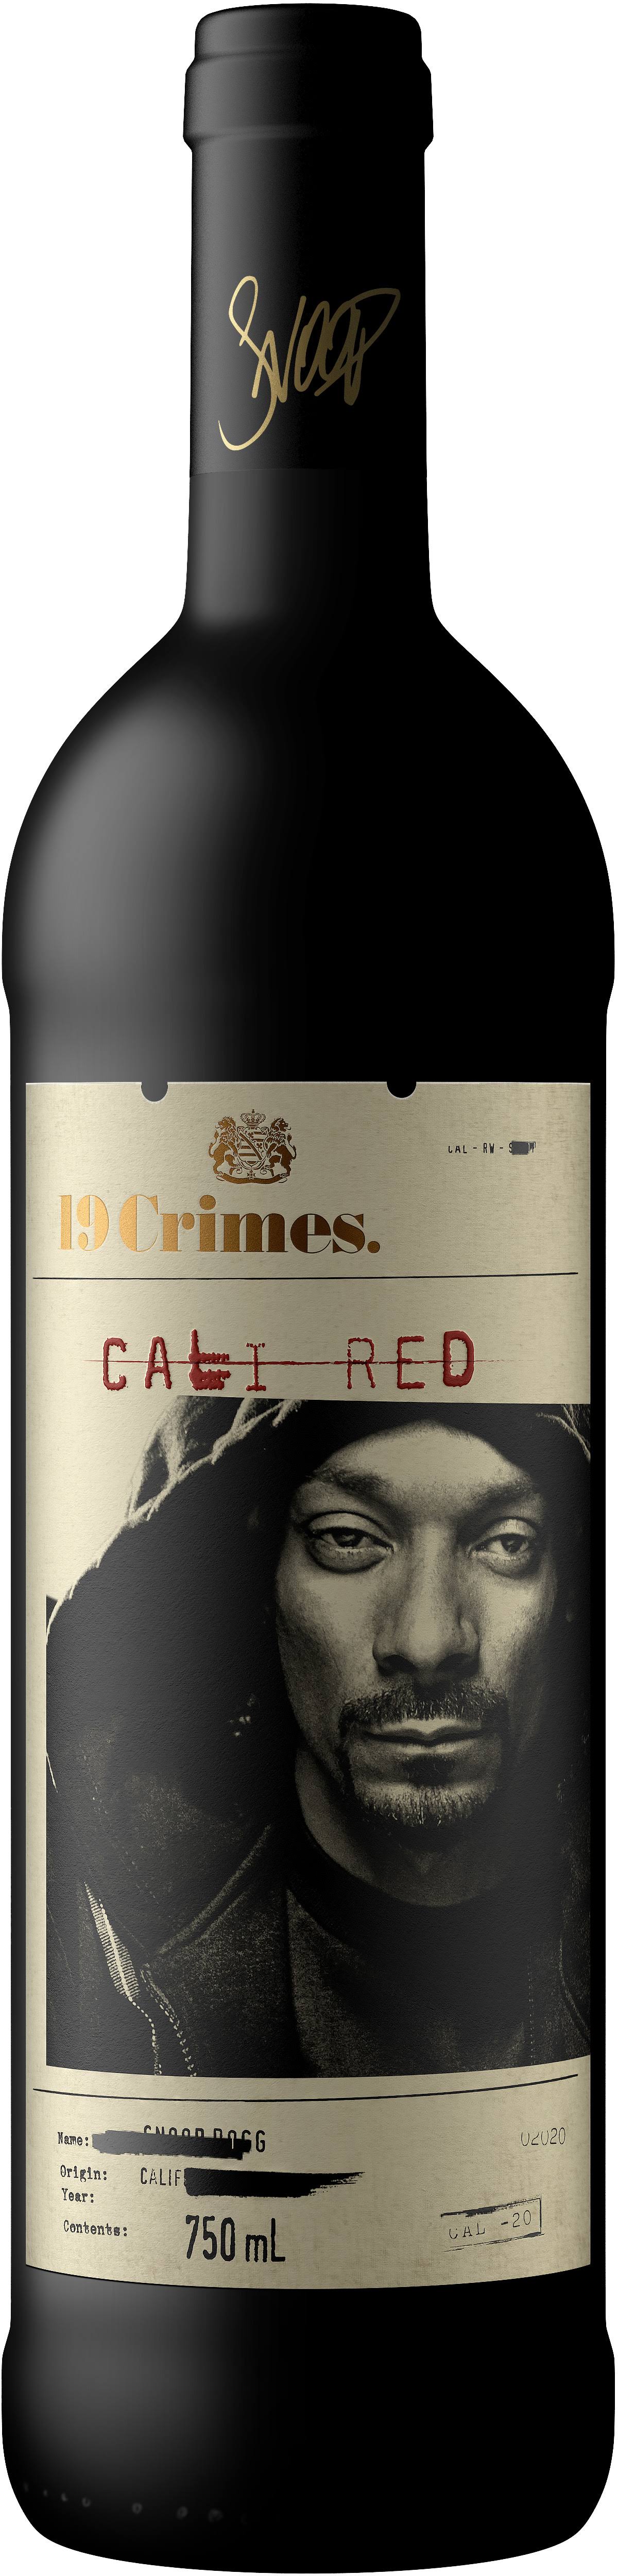 19 Crimes Cali Red Wine 2020 by Snoop Dogg